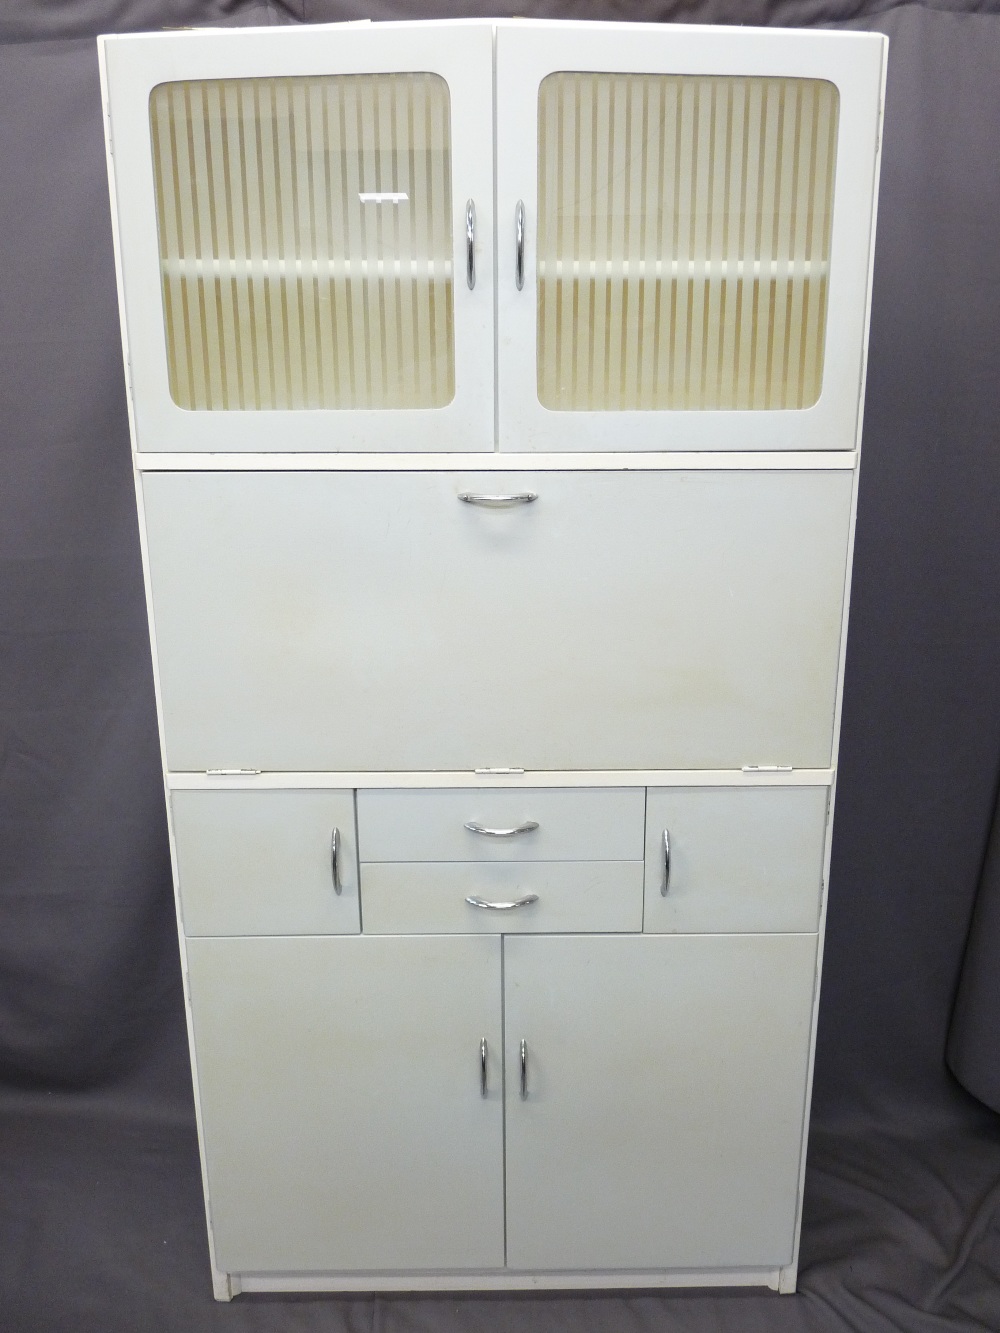 MID-CENTURY PAINTED KITCHEN CABINET, 179cms high x 92cms wide x 41cms deep